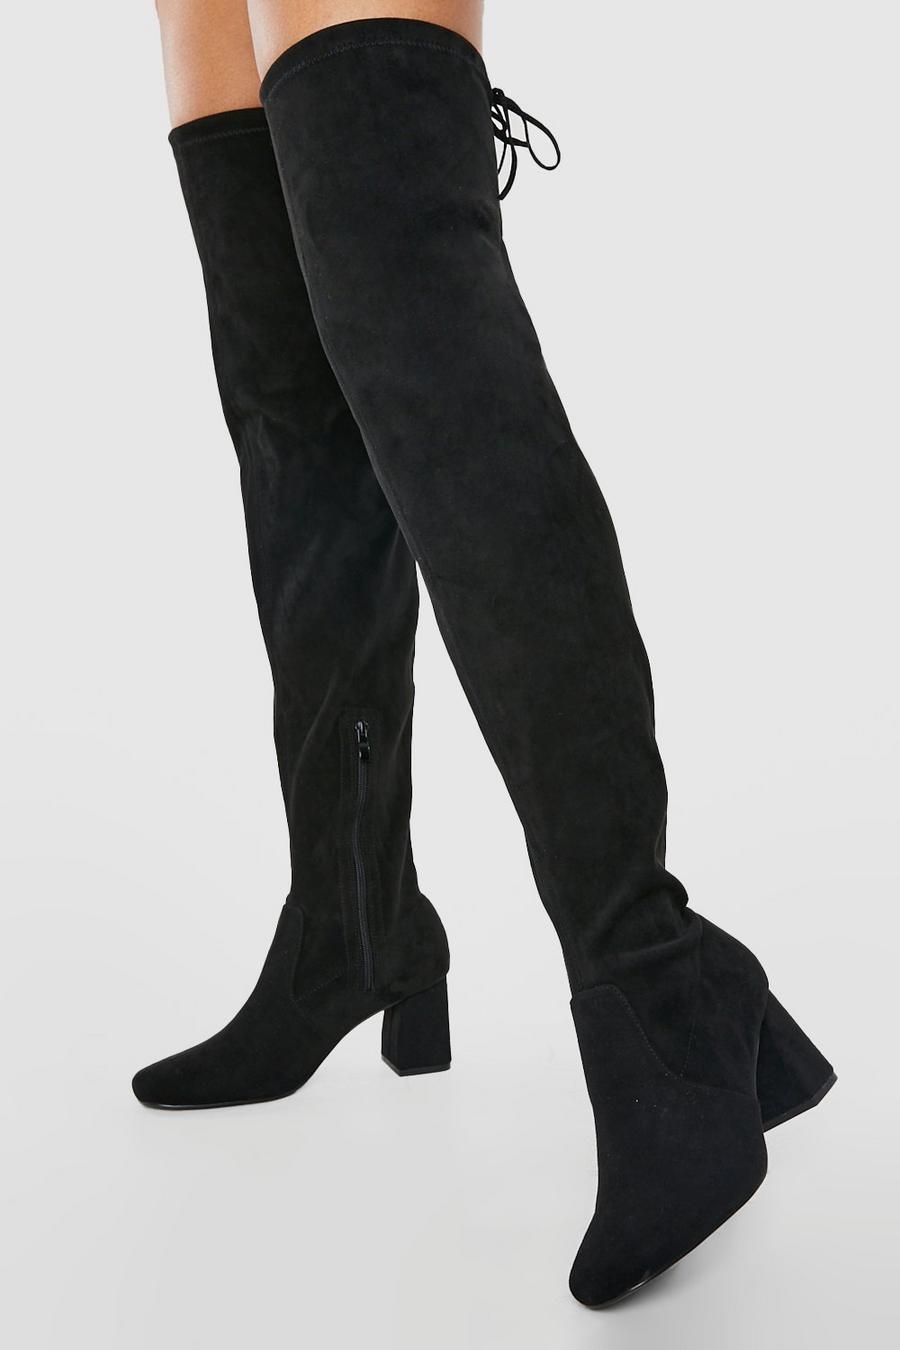 Black Wide Fit Over The Knee Block Heeled Boots image number 1